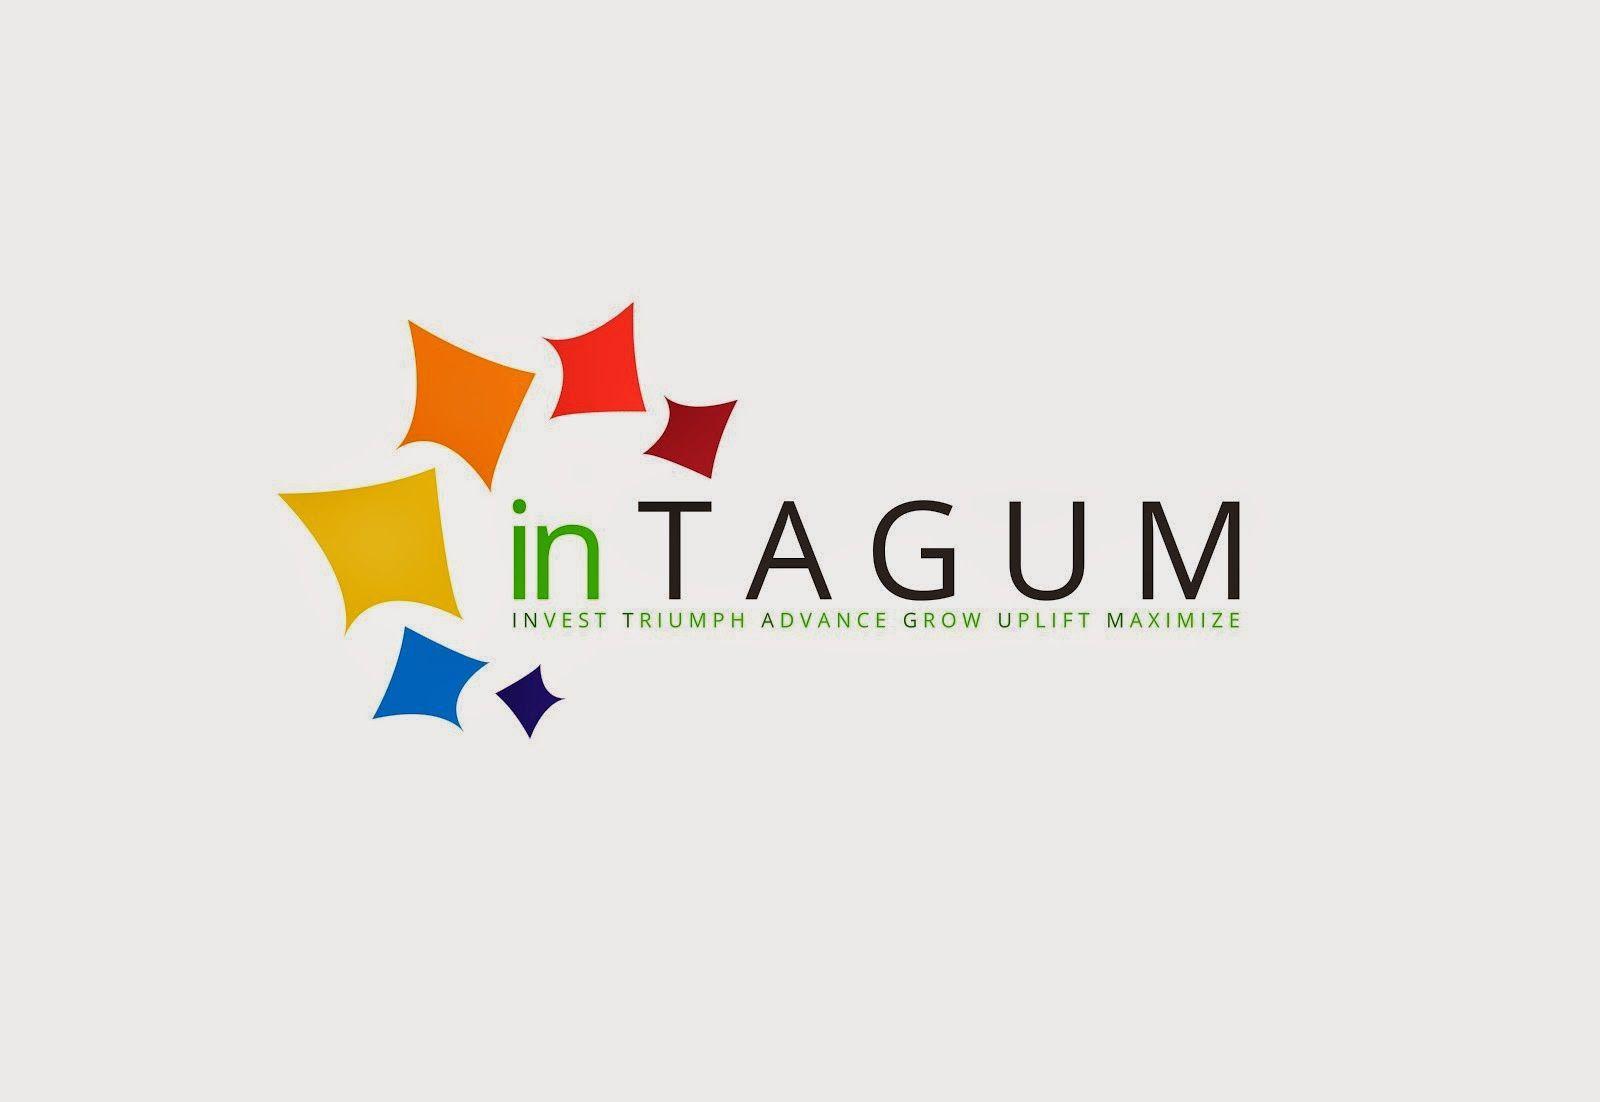 Multi Word Logo - inTagum: ABOUT OUR LOGOS